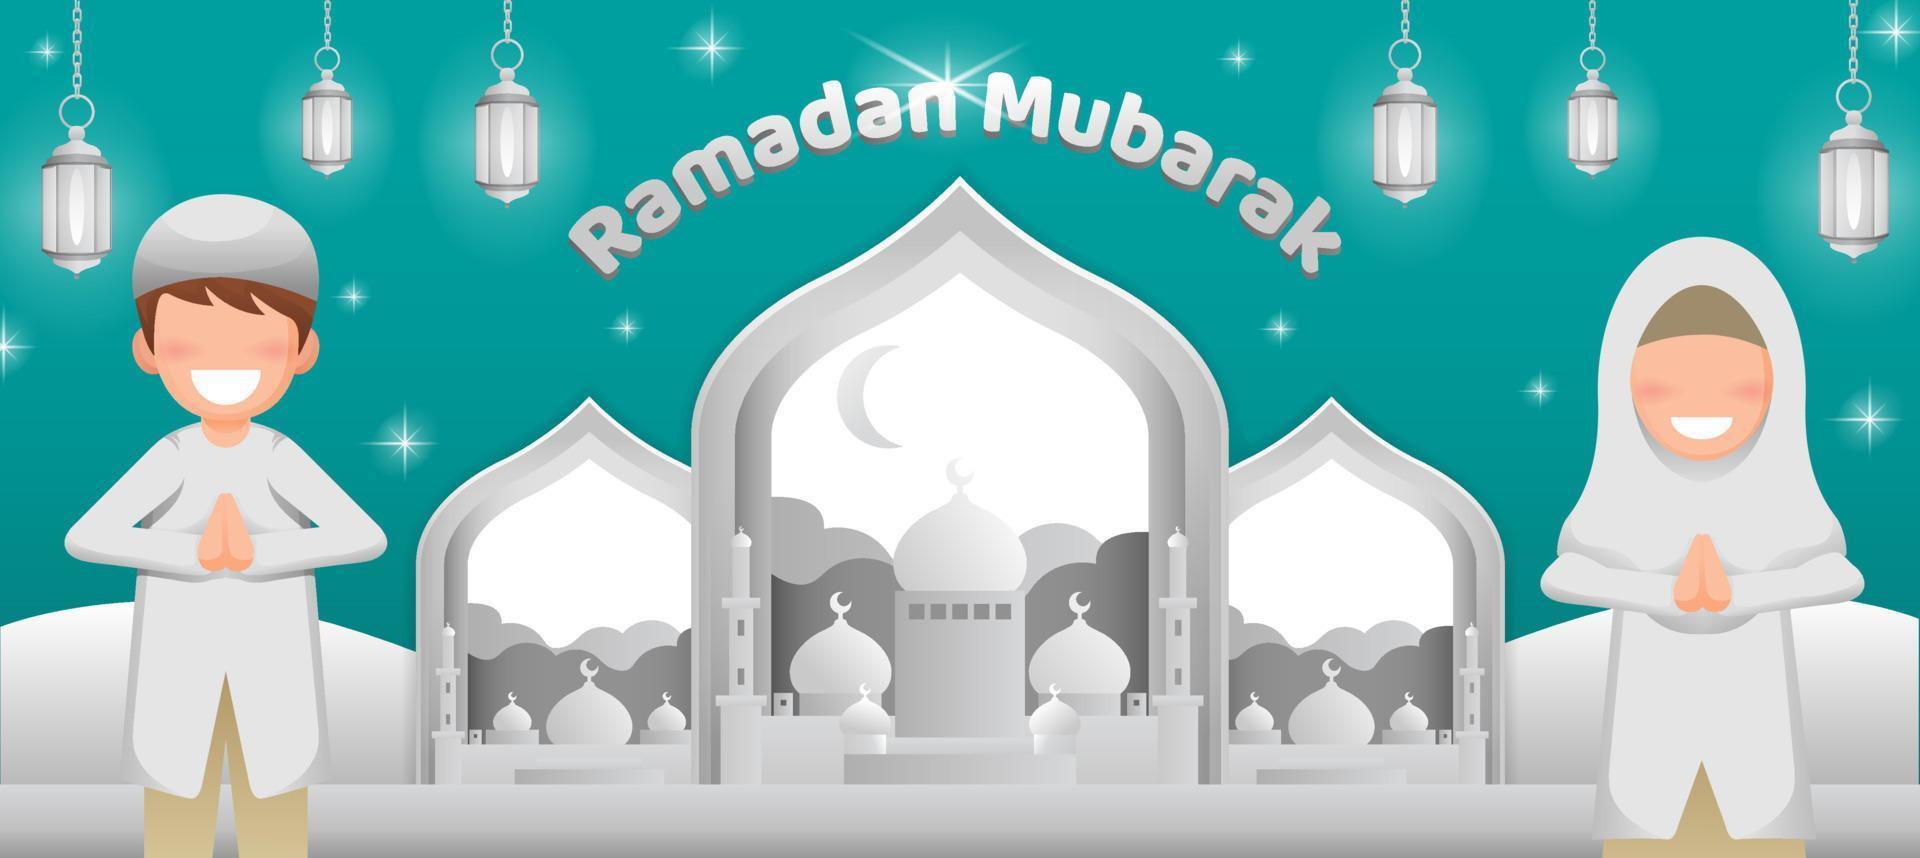 Ramadan Banner Template with Boy and Girl in White Smile in front of Mosque and Lantern Illustration vector